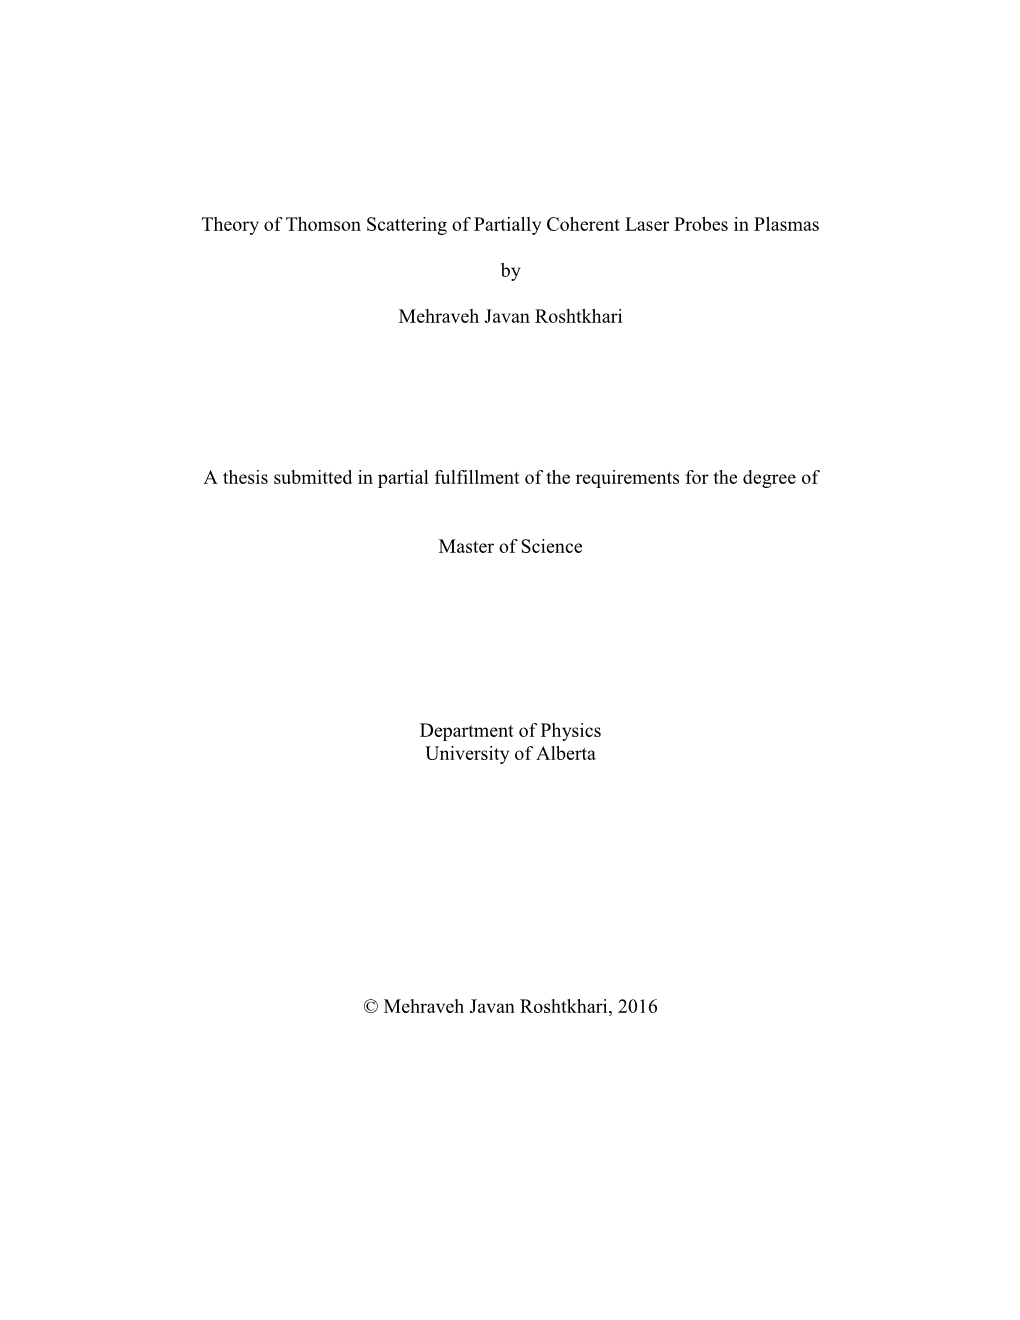 Theory of Thomson Scattering of Partially Coherent Laser Probes in Plasmas by Mehraveh Javan Roshtkhari a Thesis Submitted in Pa